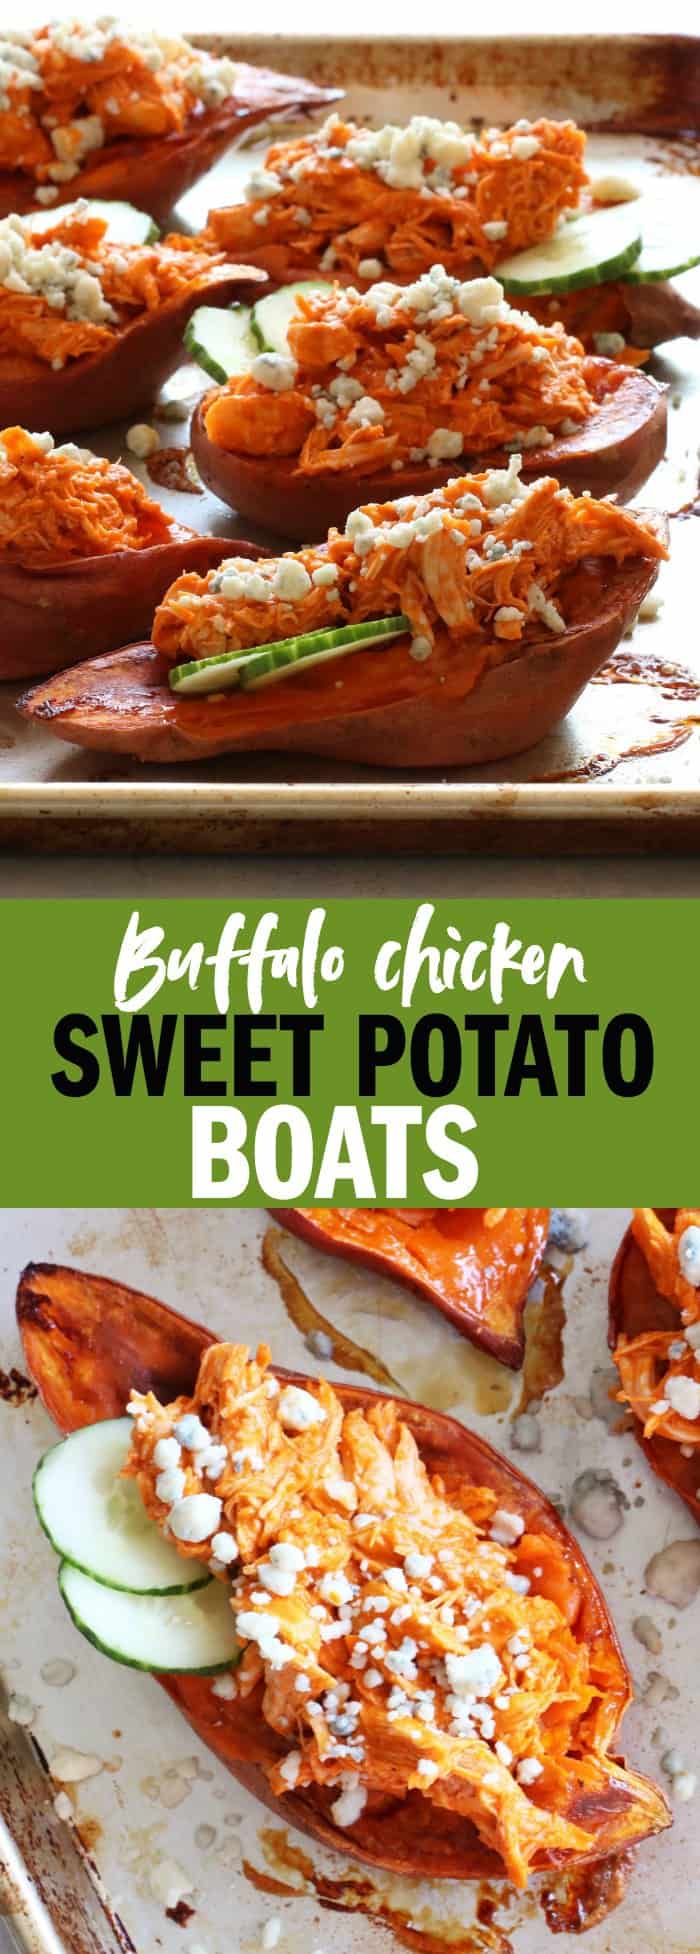 These Shredded Buffalo Chicken Sweet Potato Boats are easy enough for a weeknight dinner, but the flavorful and indulgent enough for a game day treat! thetoastedpinenut.com #glutenfree #primal #paleofriendly #gameday #superbowl